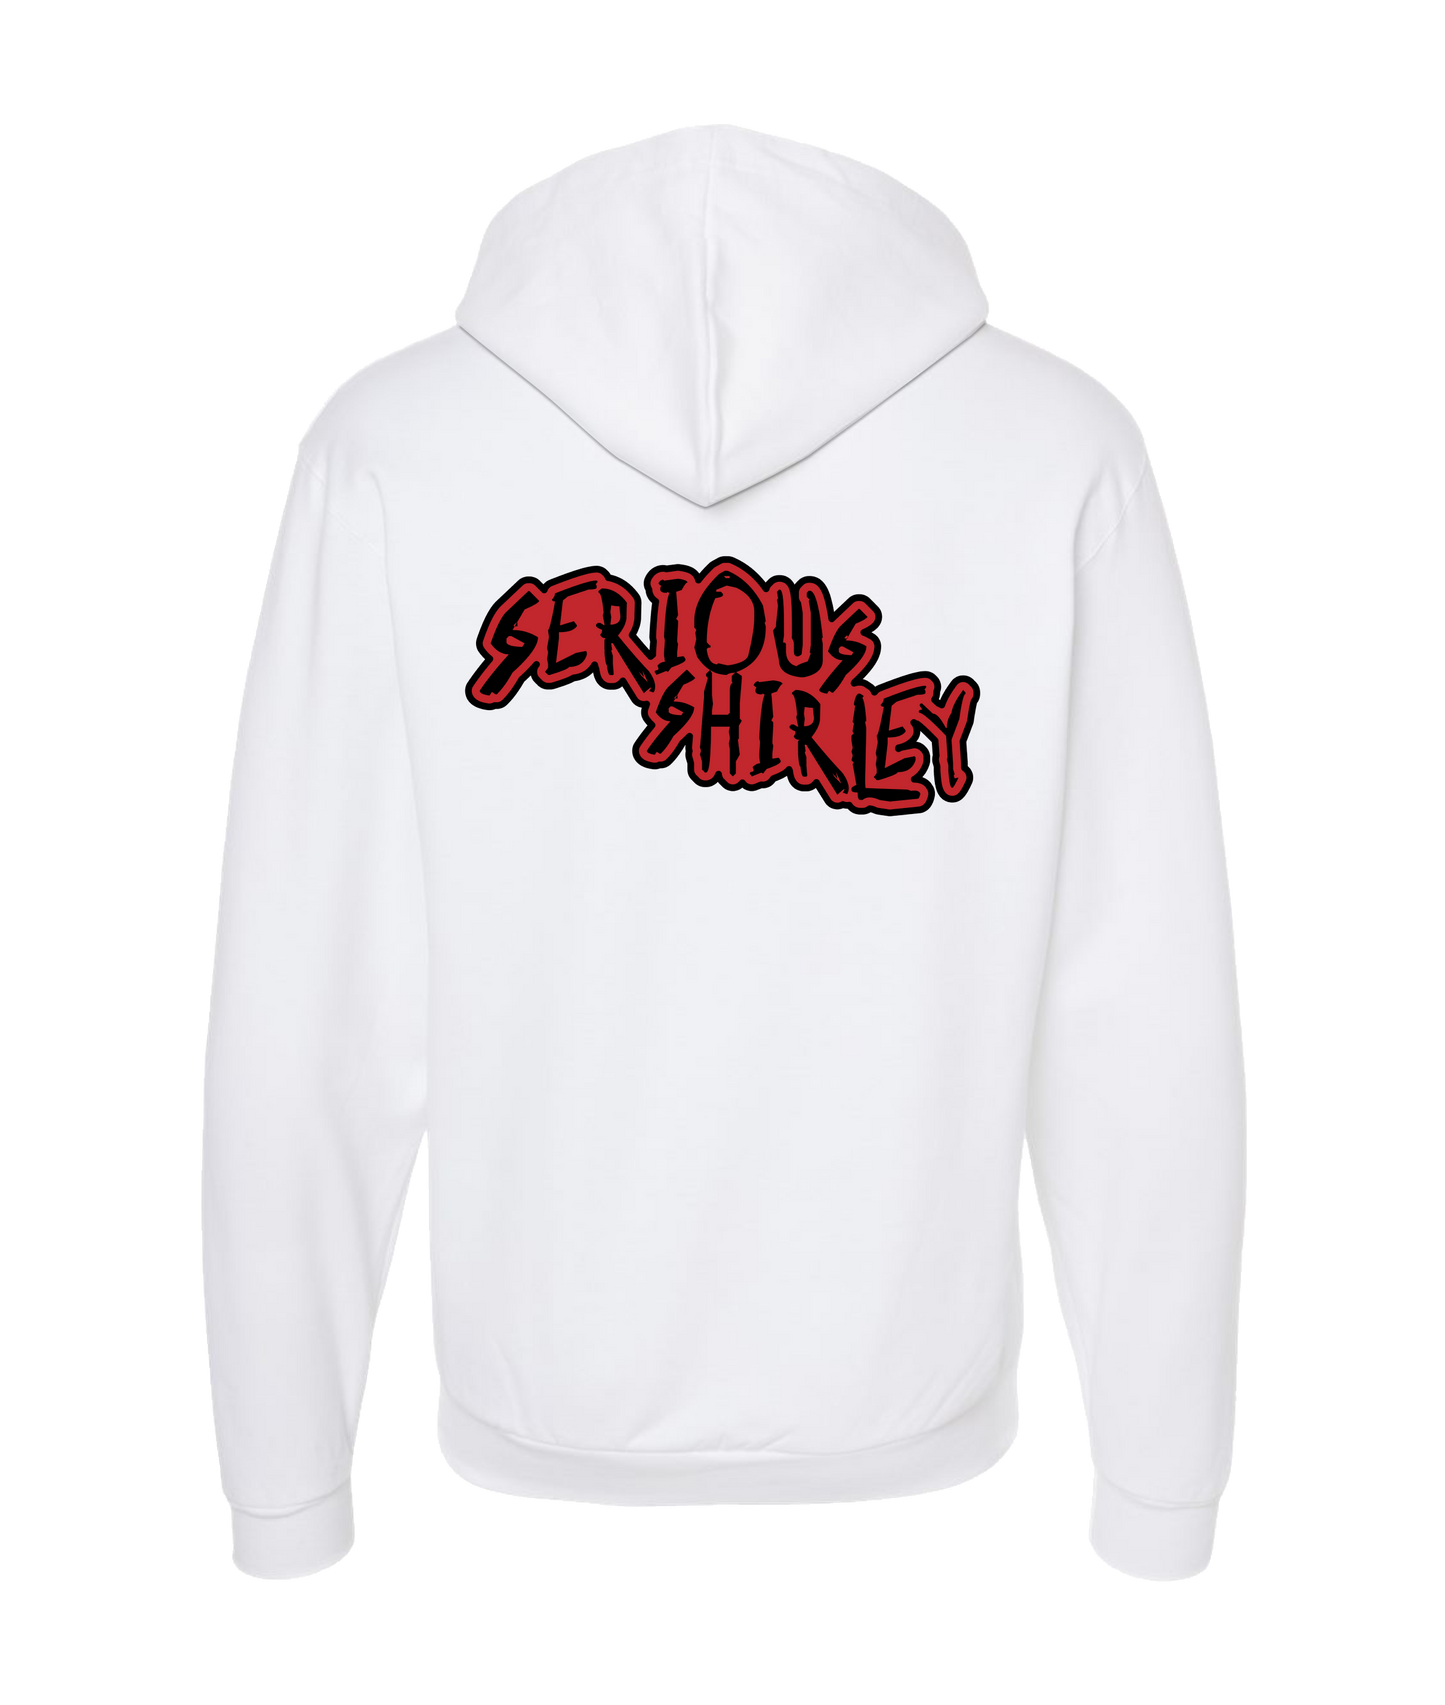 Serious Shirley - Red Scratch - White Zip Up Hoodie